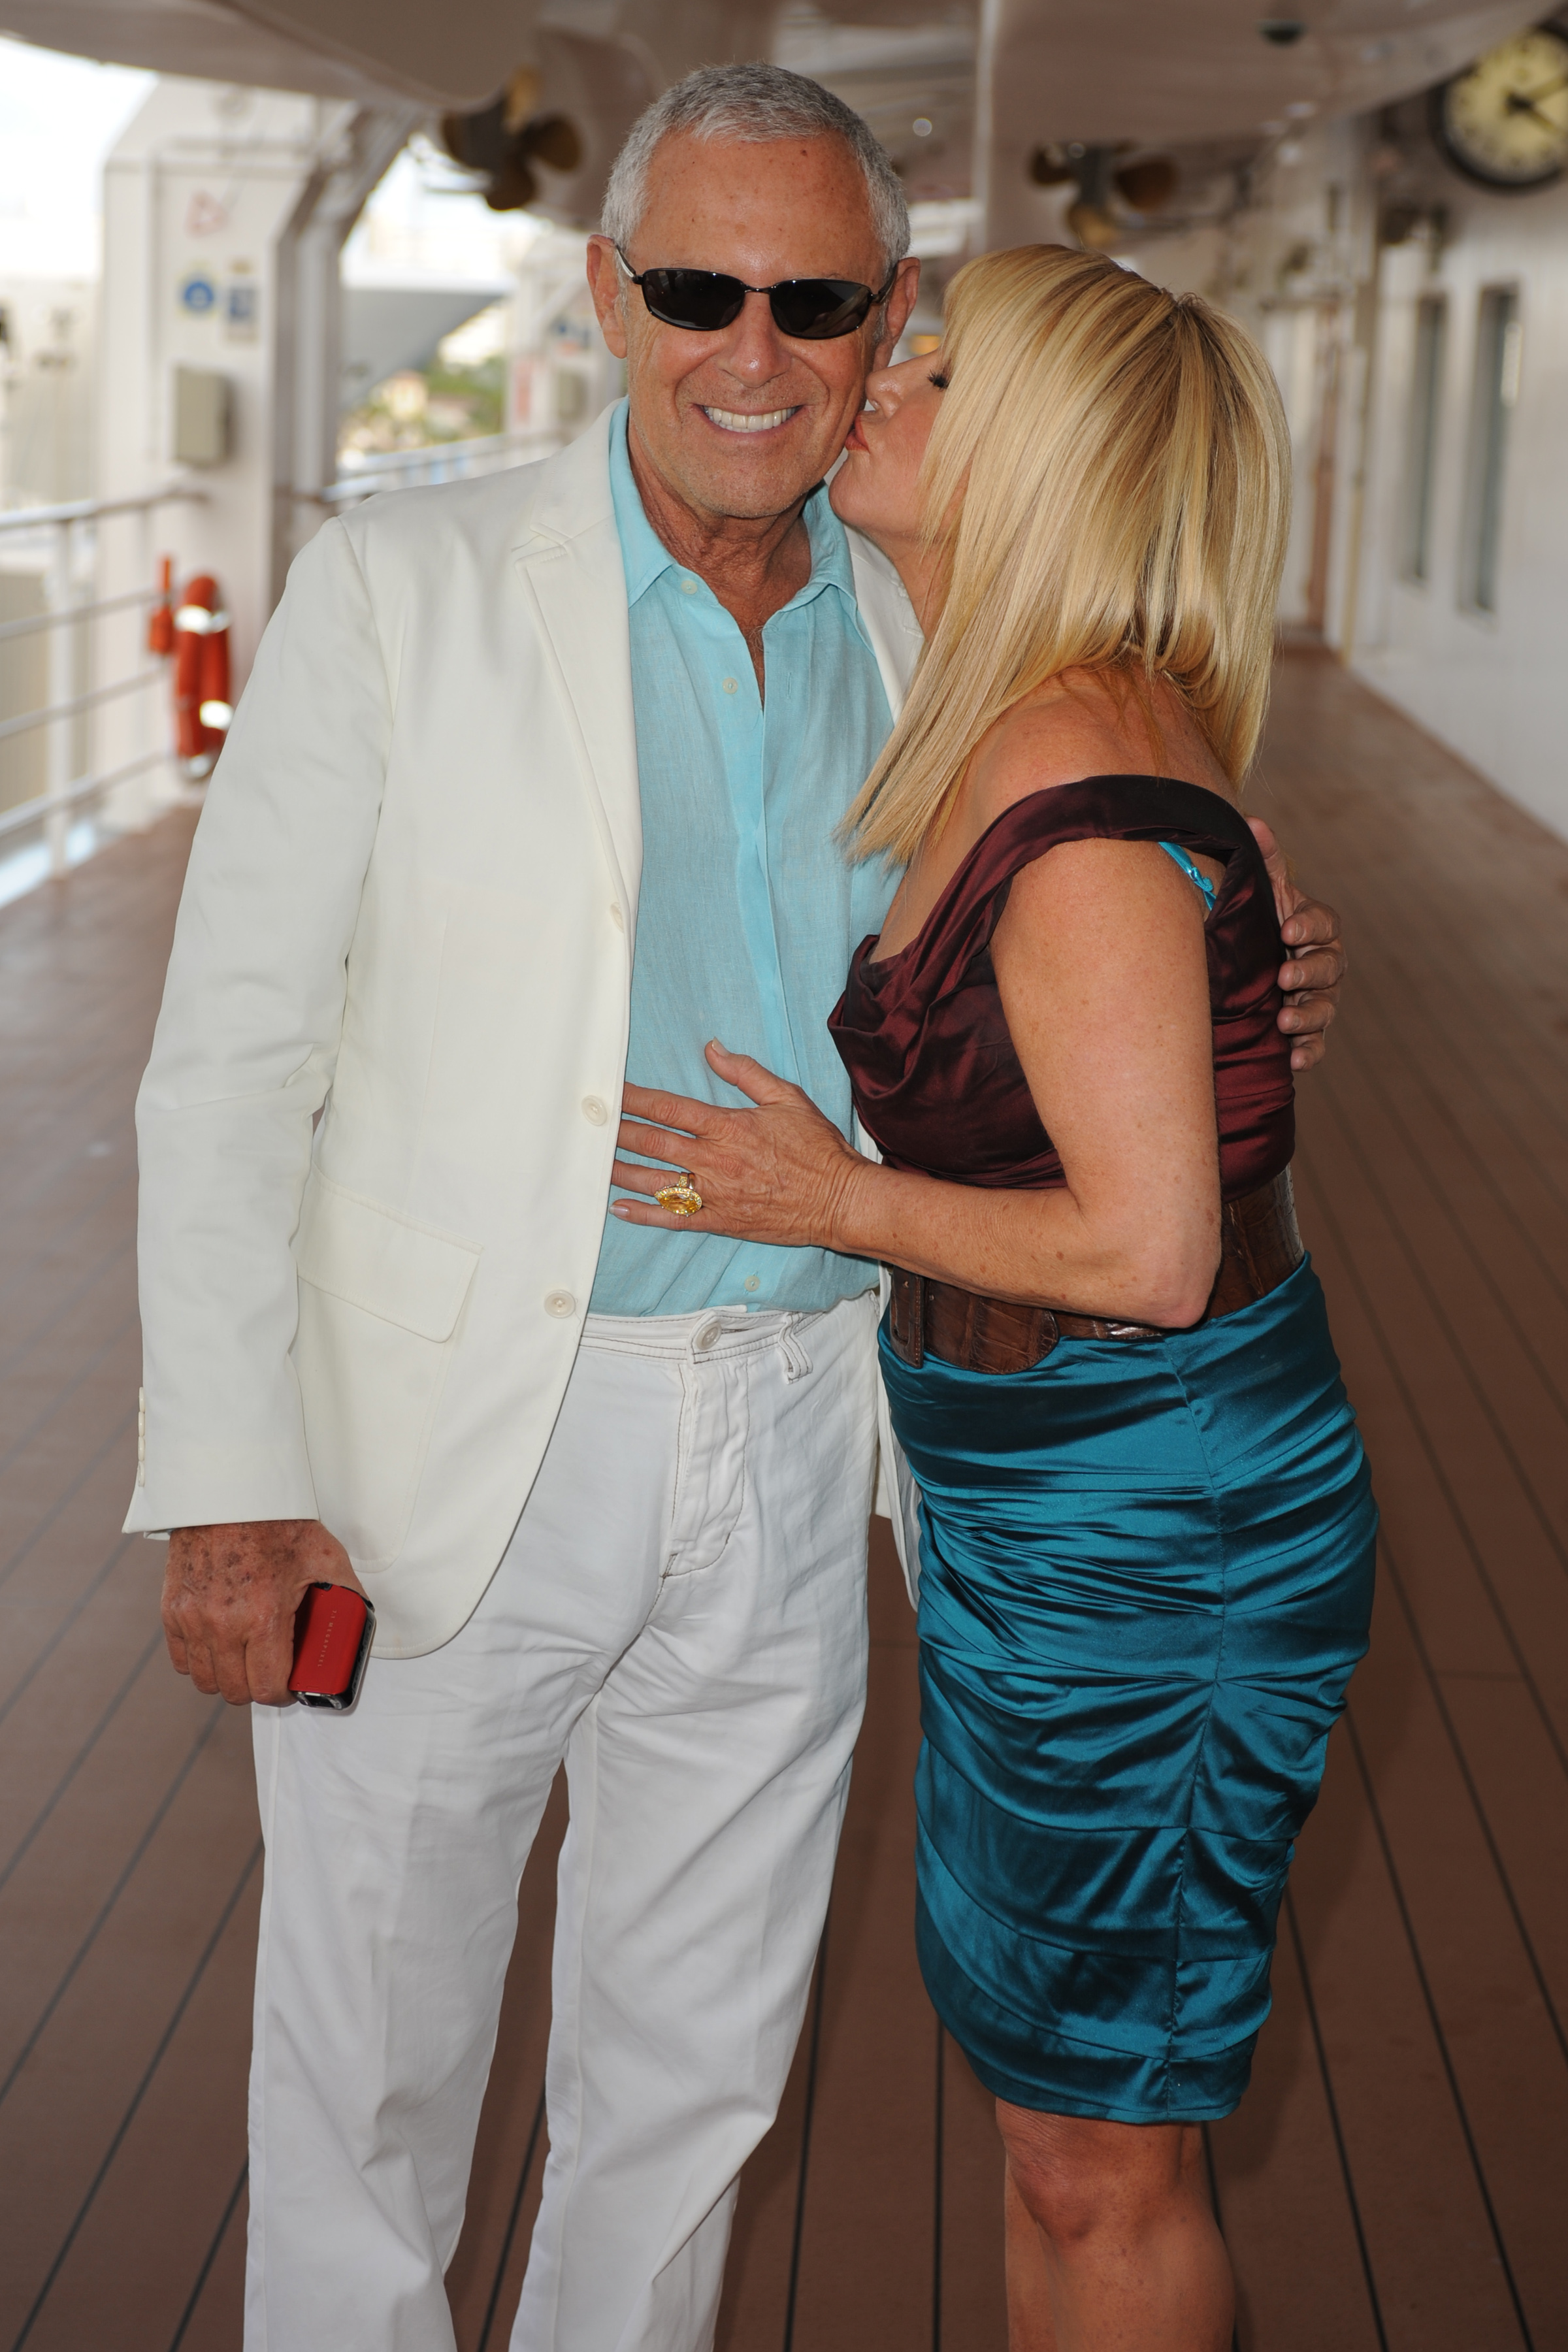 Suzanne Somers and husband Alan Hamel in Florida in 2009 | Source: Getty Images